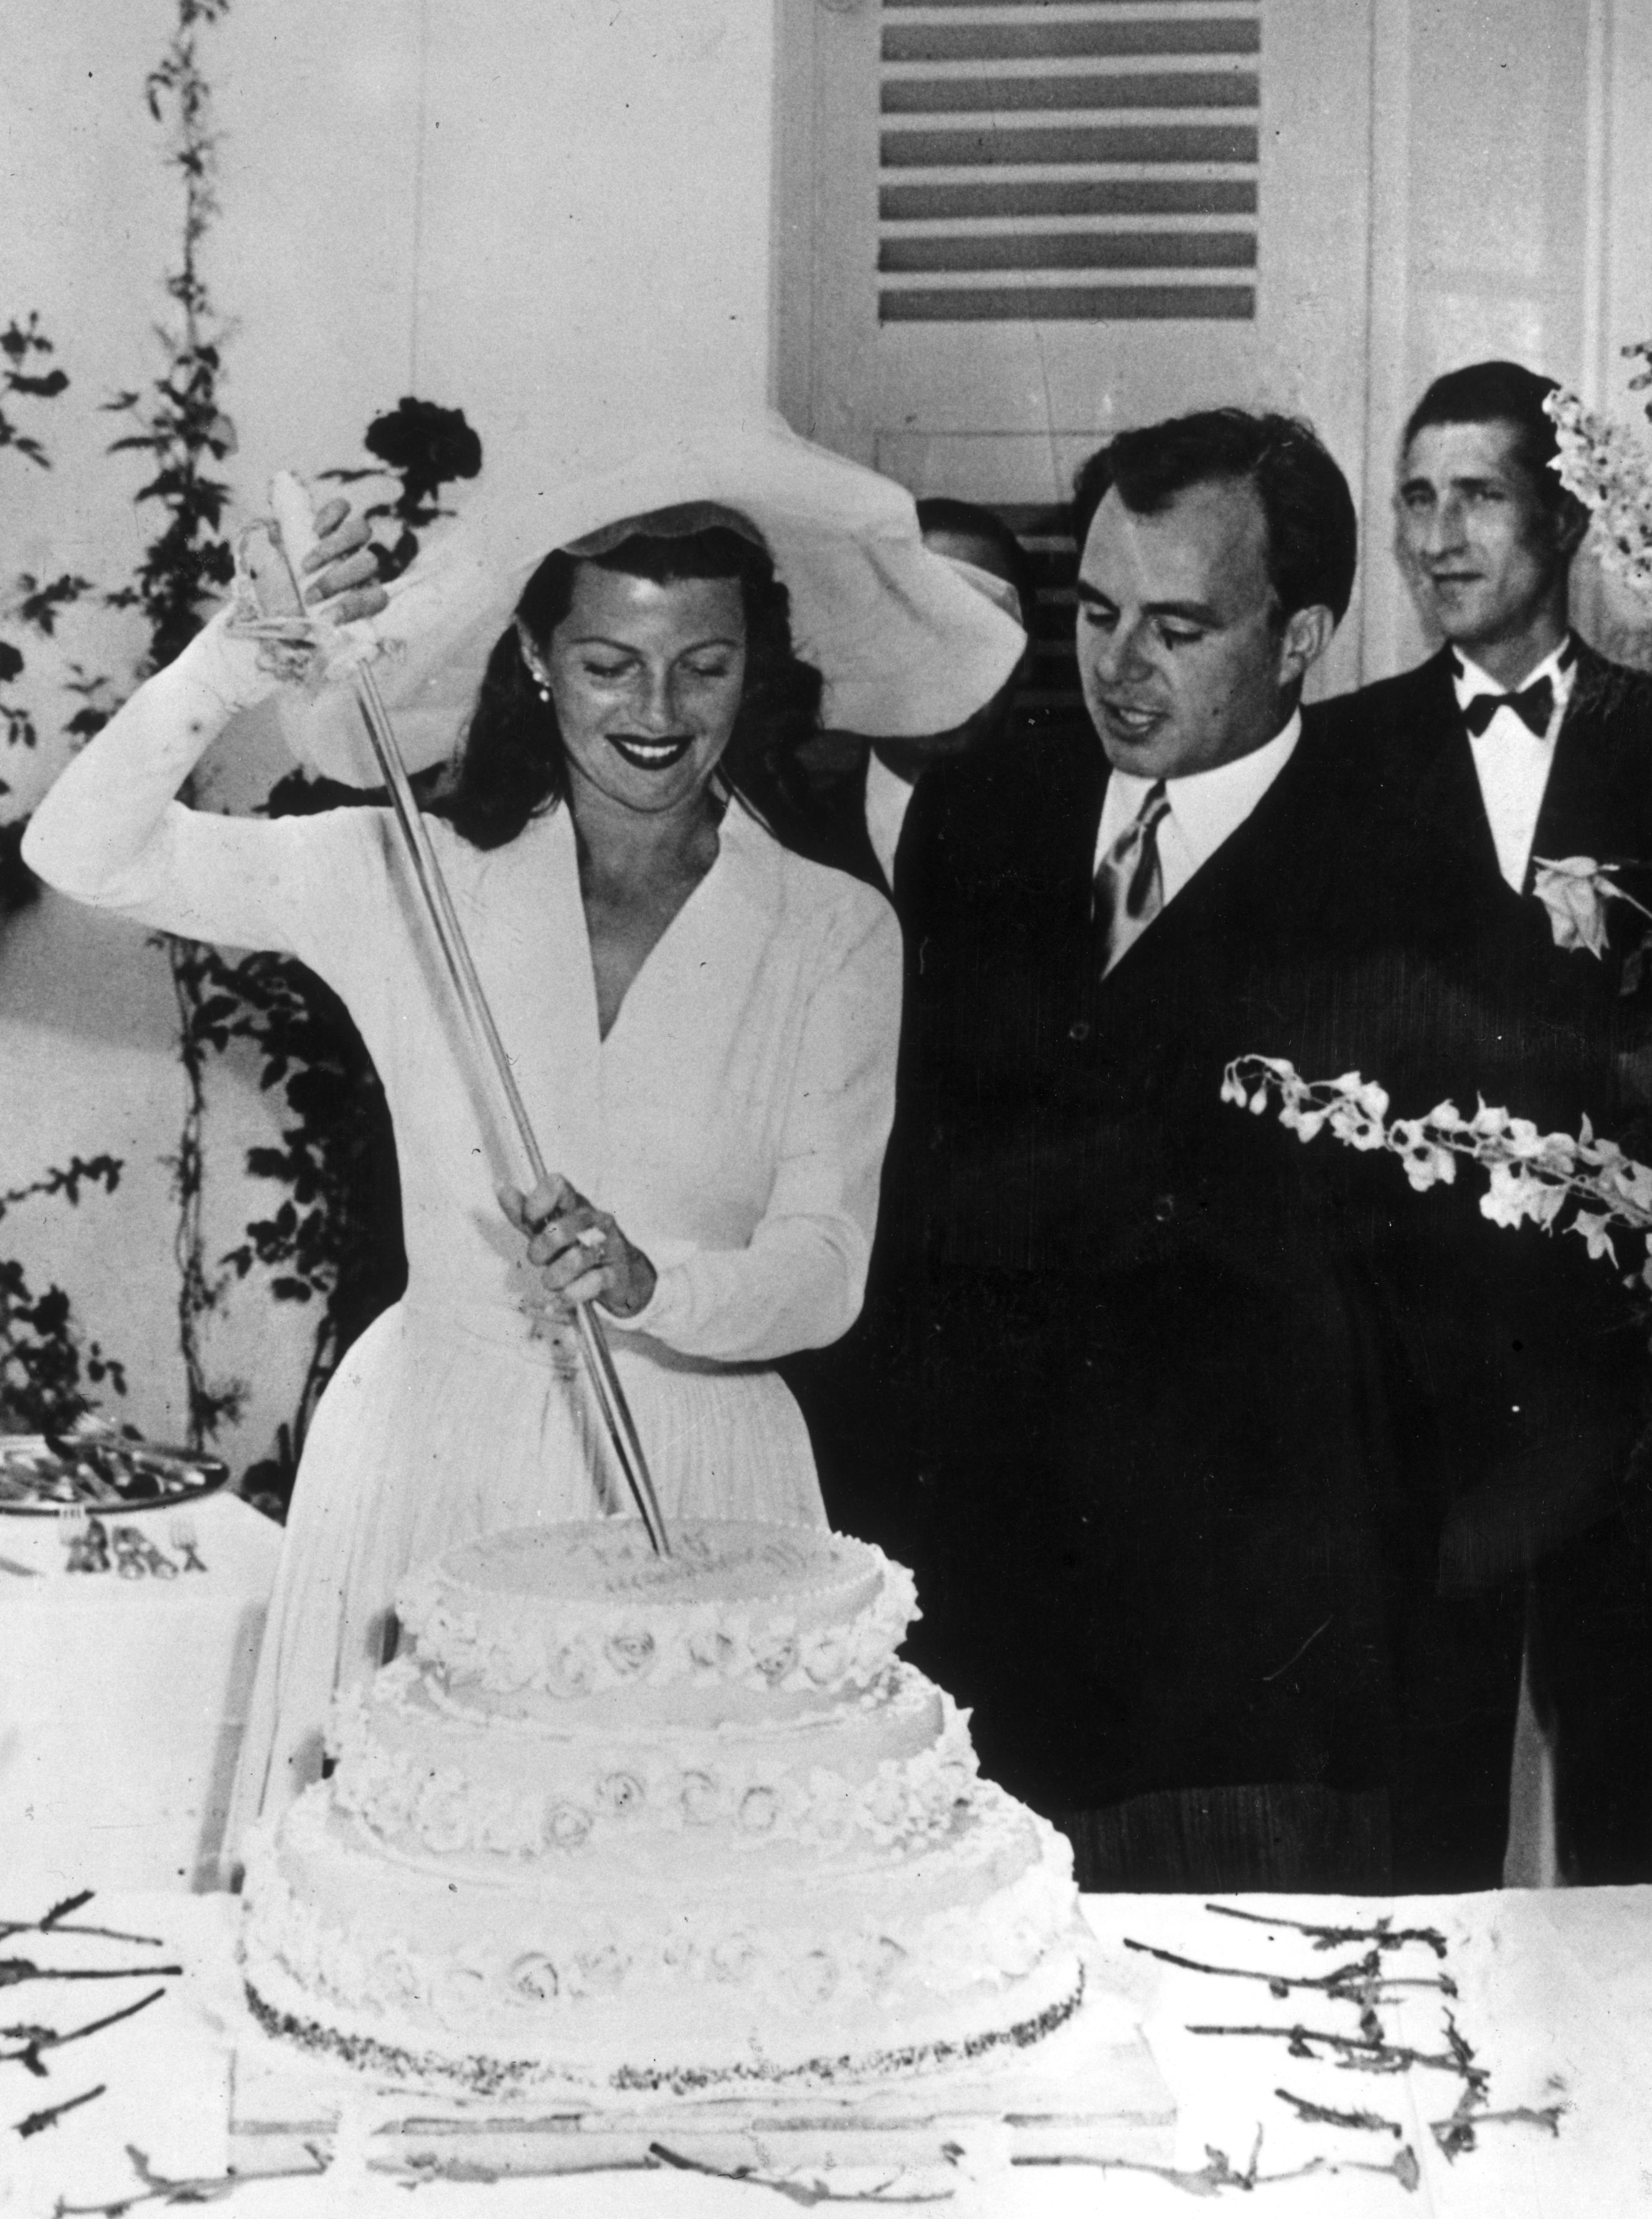 Vintage Photos Show Celebrity Weddings in the 1950s